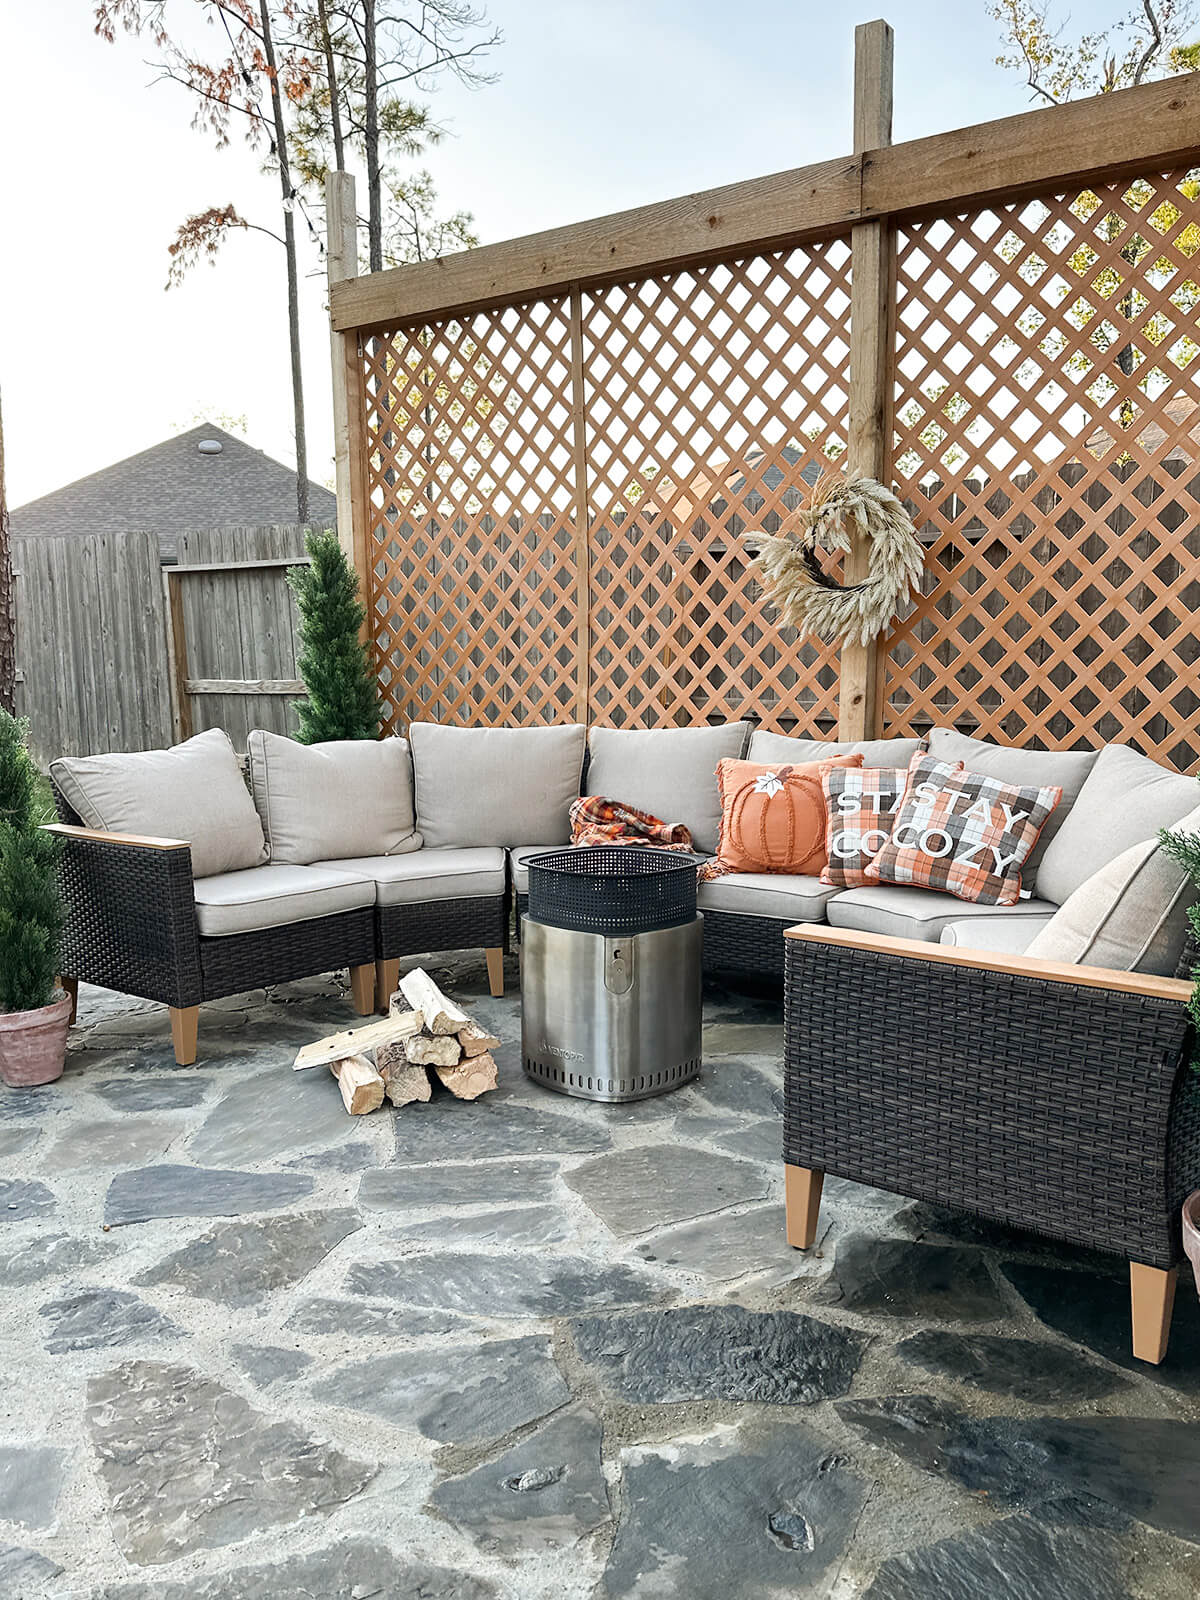 A smokeless fire pit and a pile of firewood are placed next to an outdoor sofa